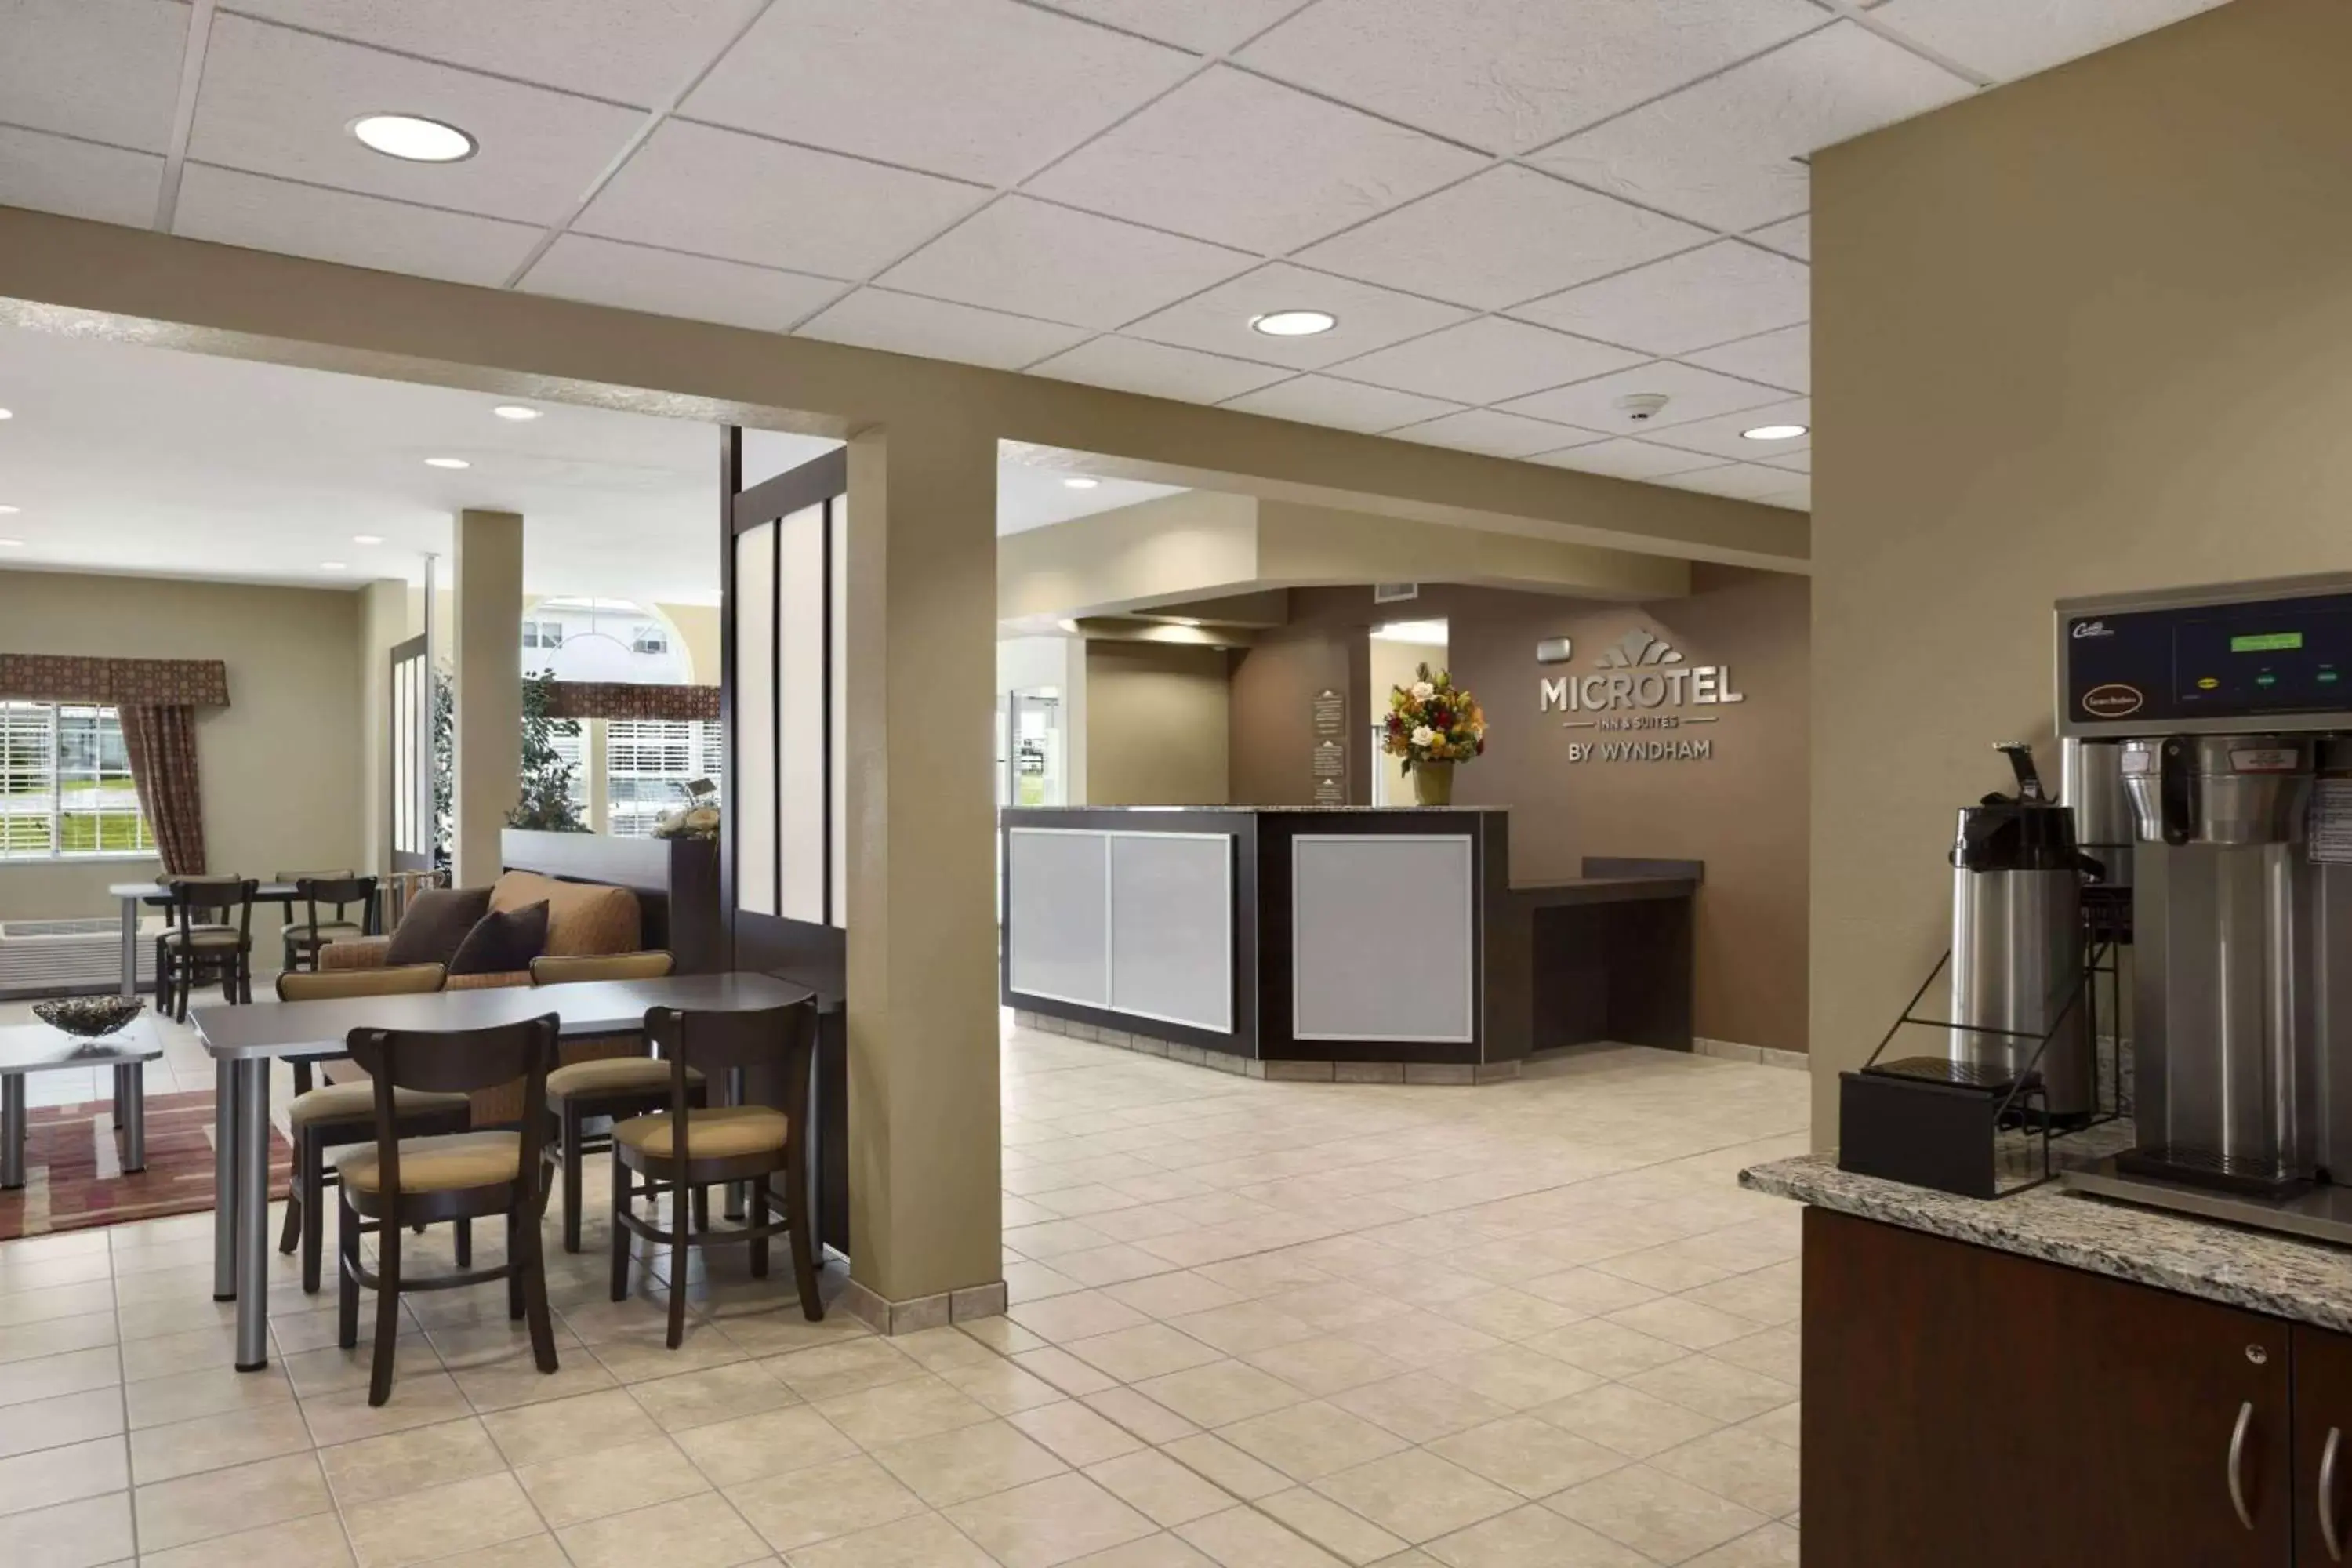 Lobby or reception in Microtel Inn and Suites Carrollton